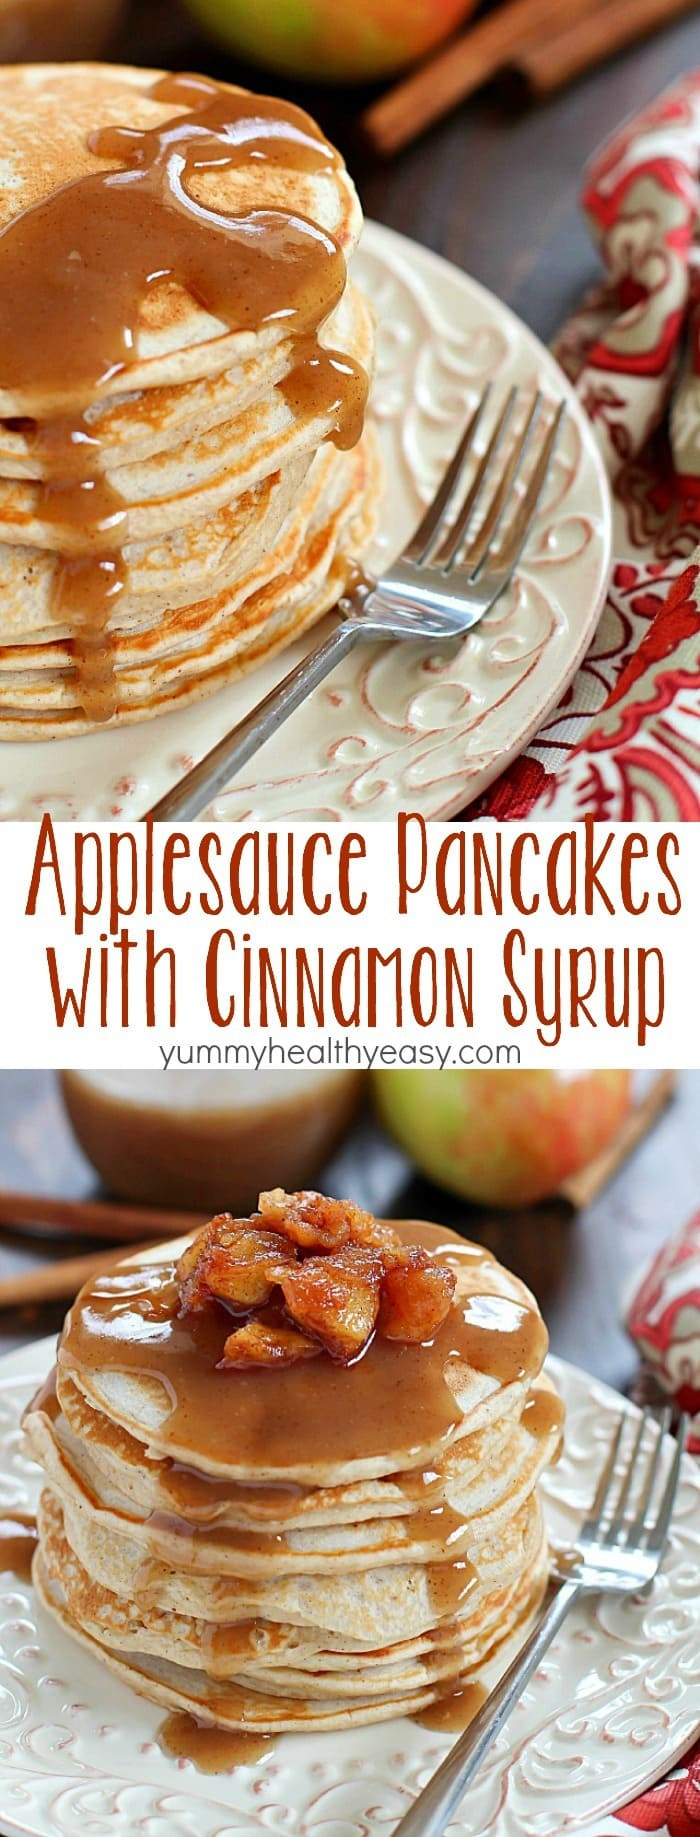 Are Pancakes Healthy
 Applesauce Pancakes with Cinnamon Syrup Yummy Healthy Easy